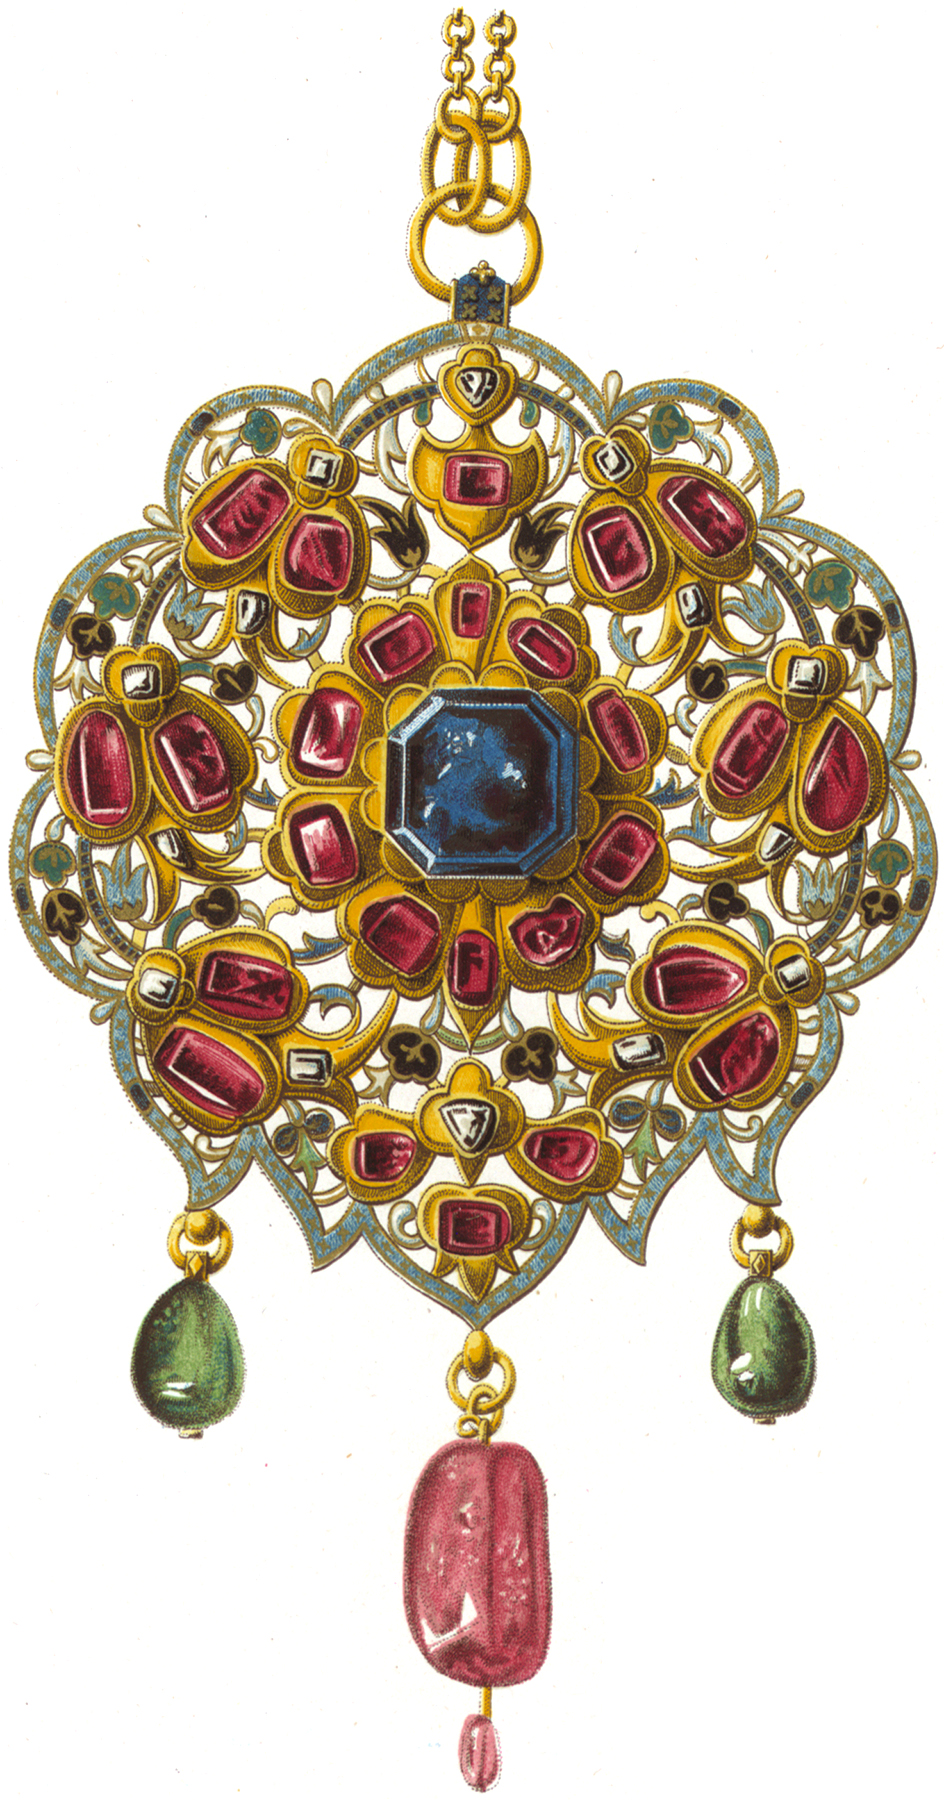 Antique jewelry with colored jewels